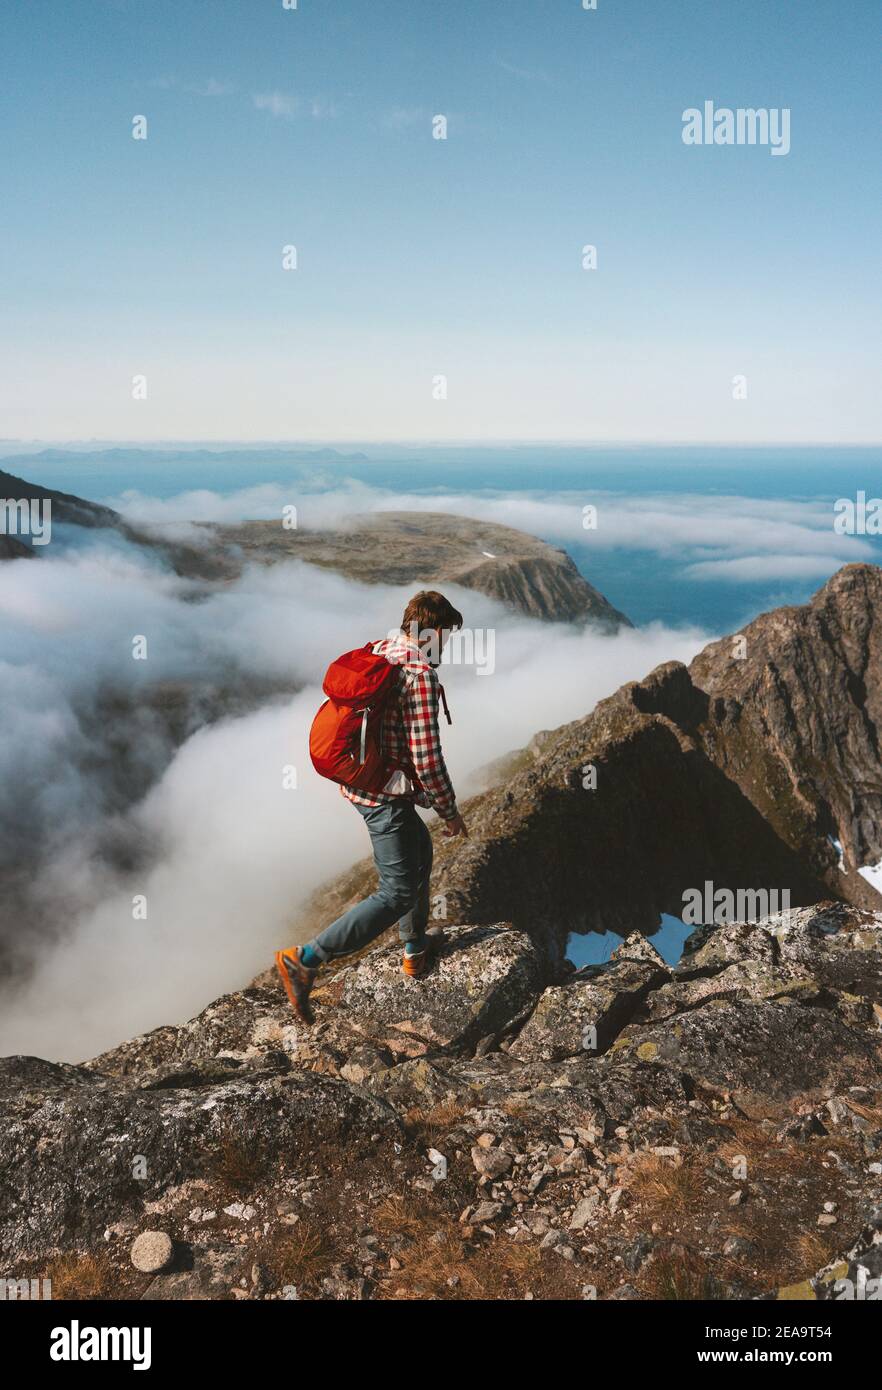 Man hiking solo on mountain ridge travel lifestyle adventures active outdoor vacation tour in Norway eco tourism concept Stock Photo